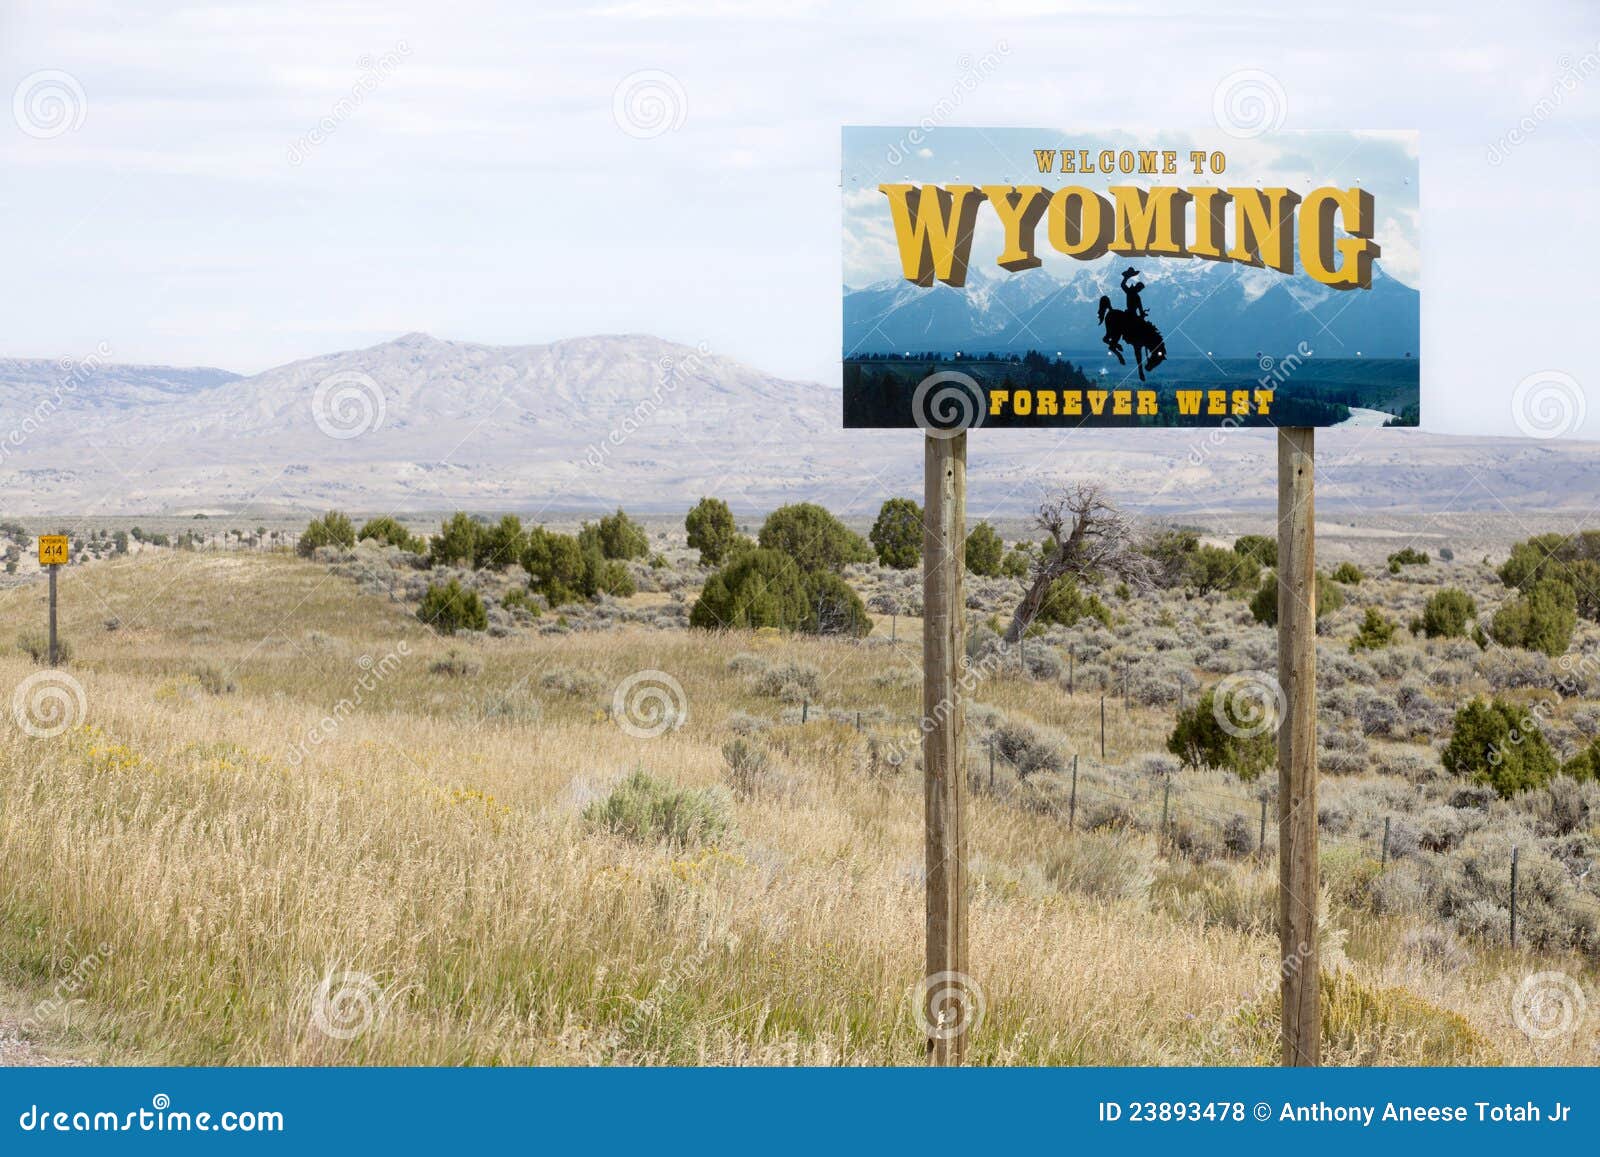 welcome to wyoming state sign